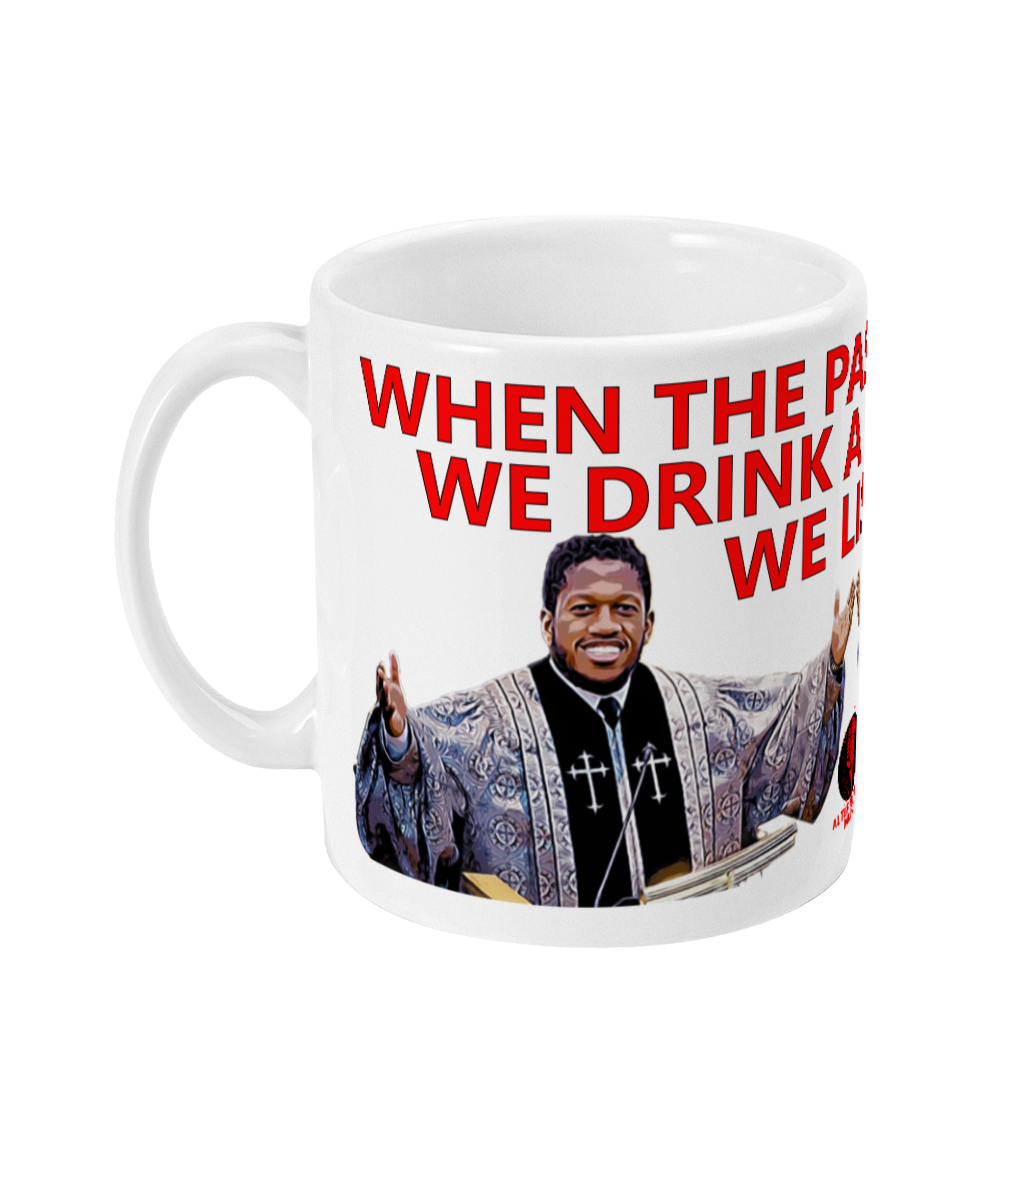 When Pastor Fred speaks we drink a brew and we listen - Mug